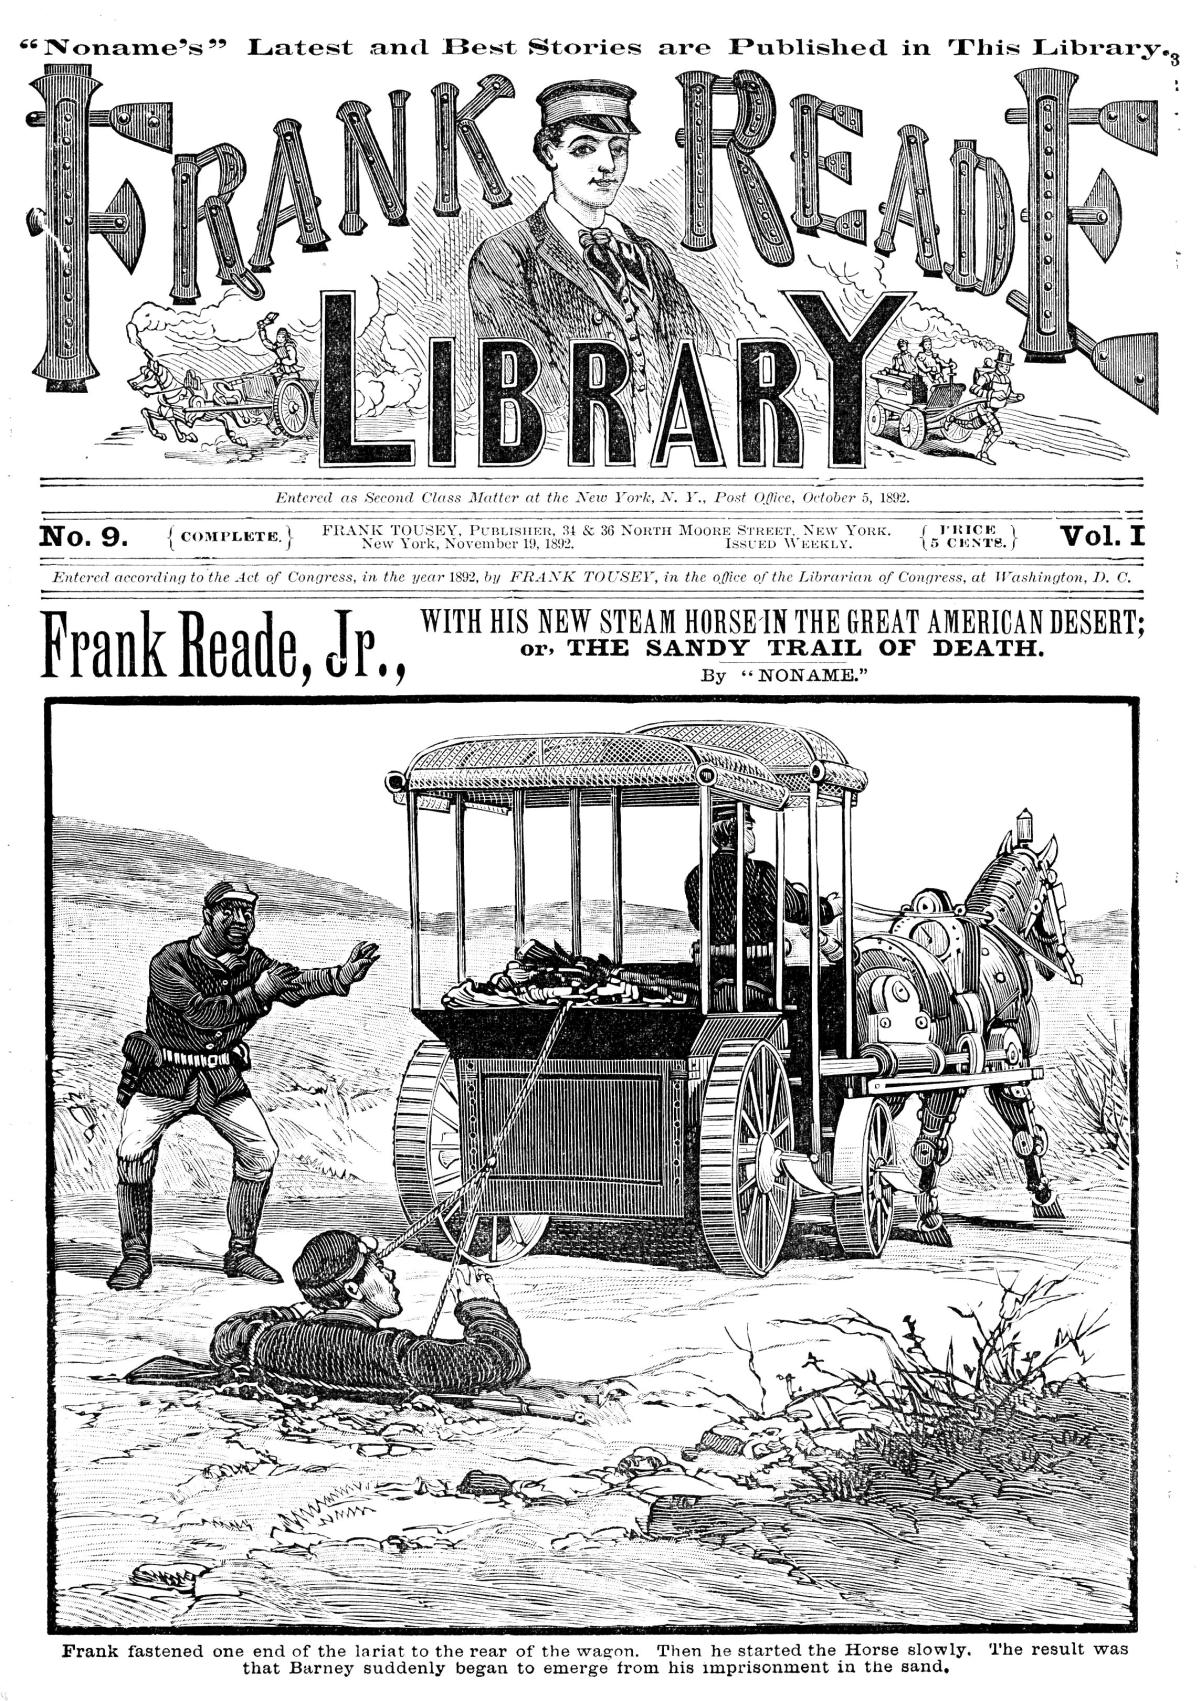 Frank Reade, Jr., with his new steam horse in the great American desert&#10;or, The sandy trail of death